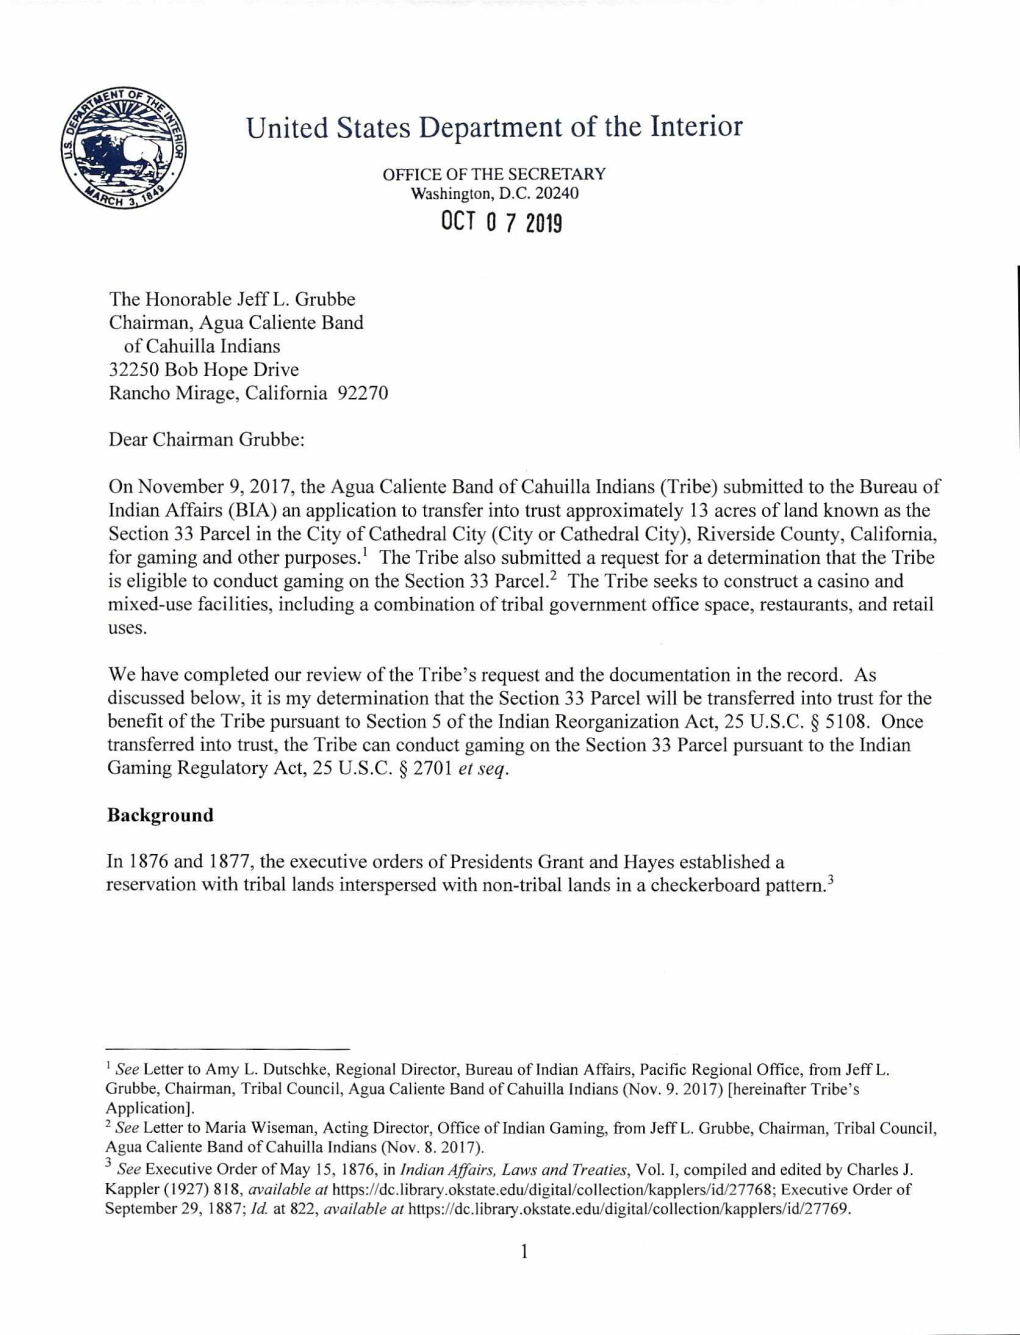 Agua Caliente Band of Cahuilla Indians Signed Decision Letter 10